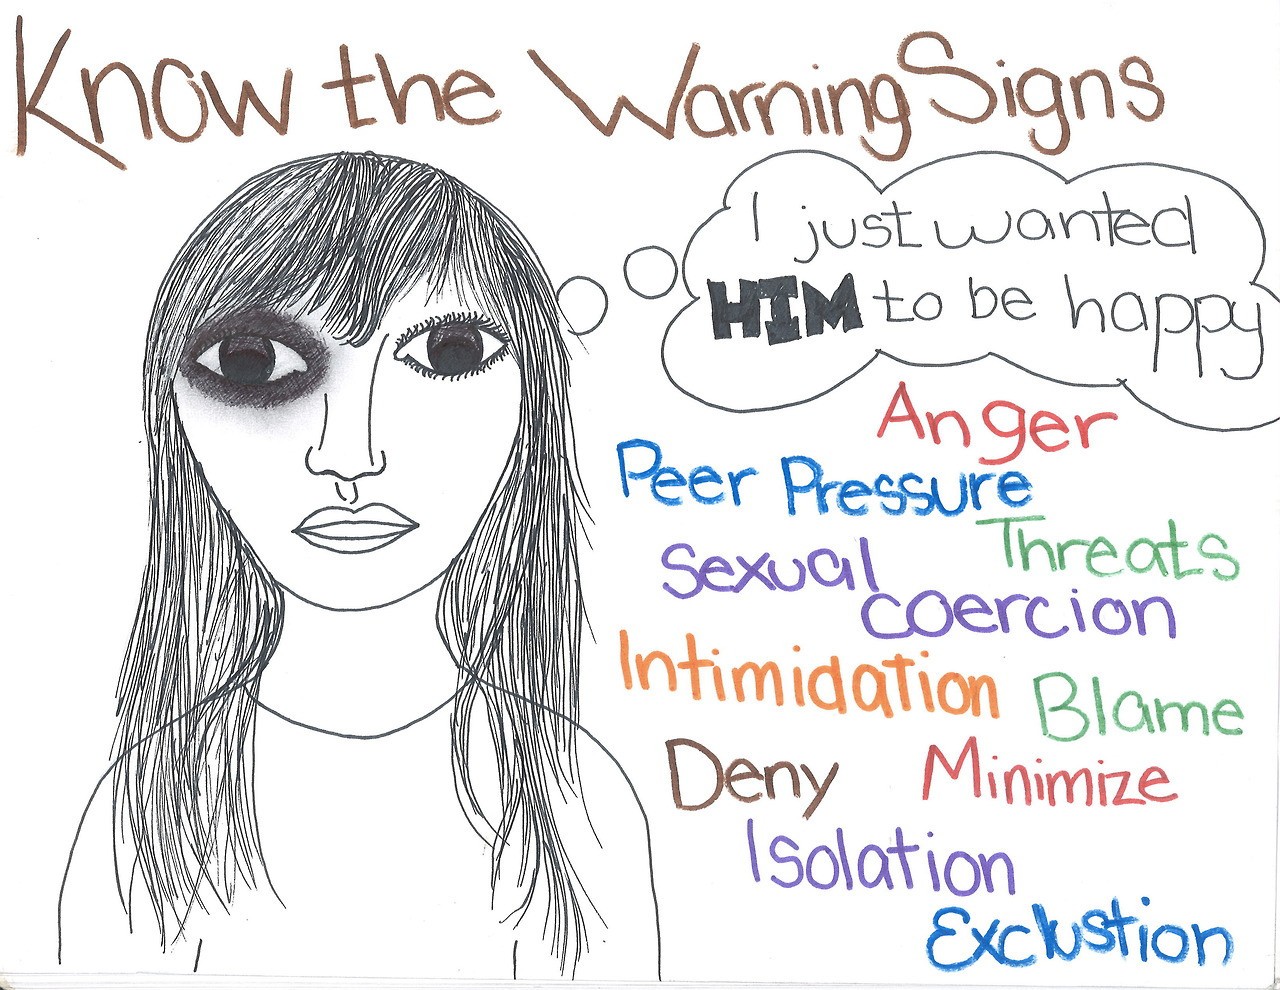 a Know the warning signs